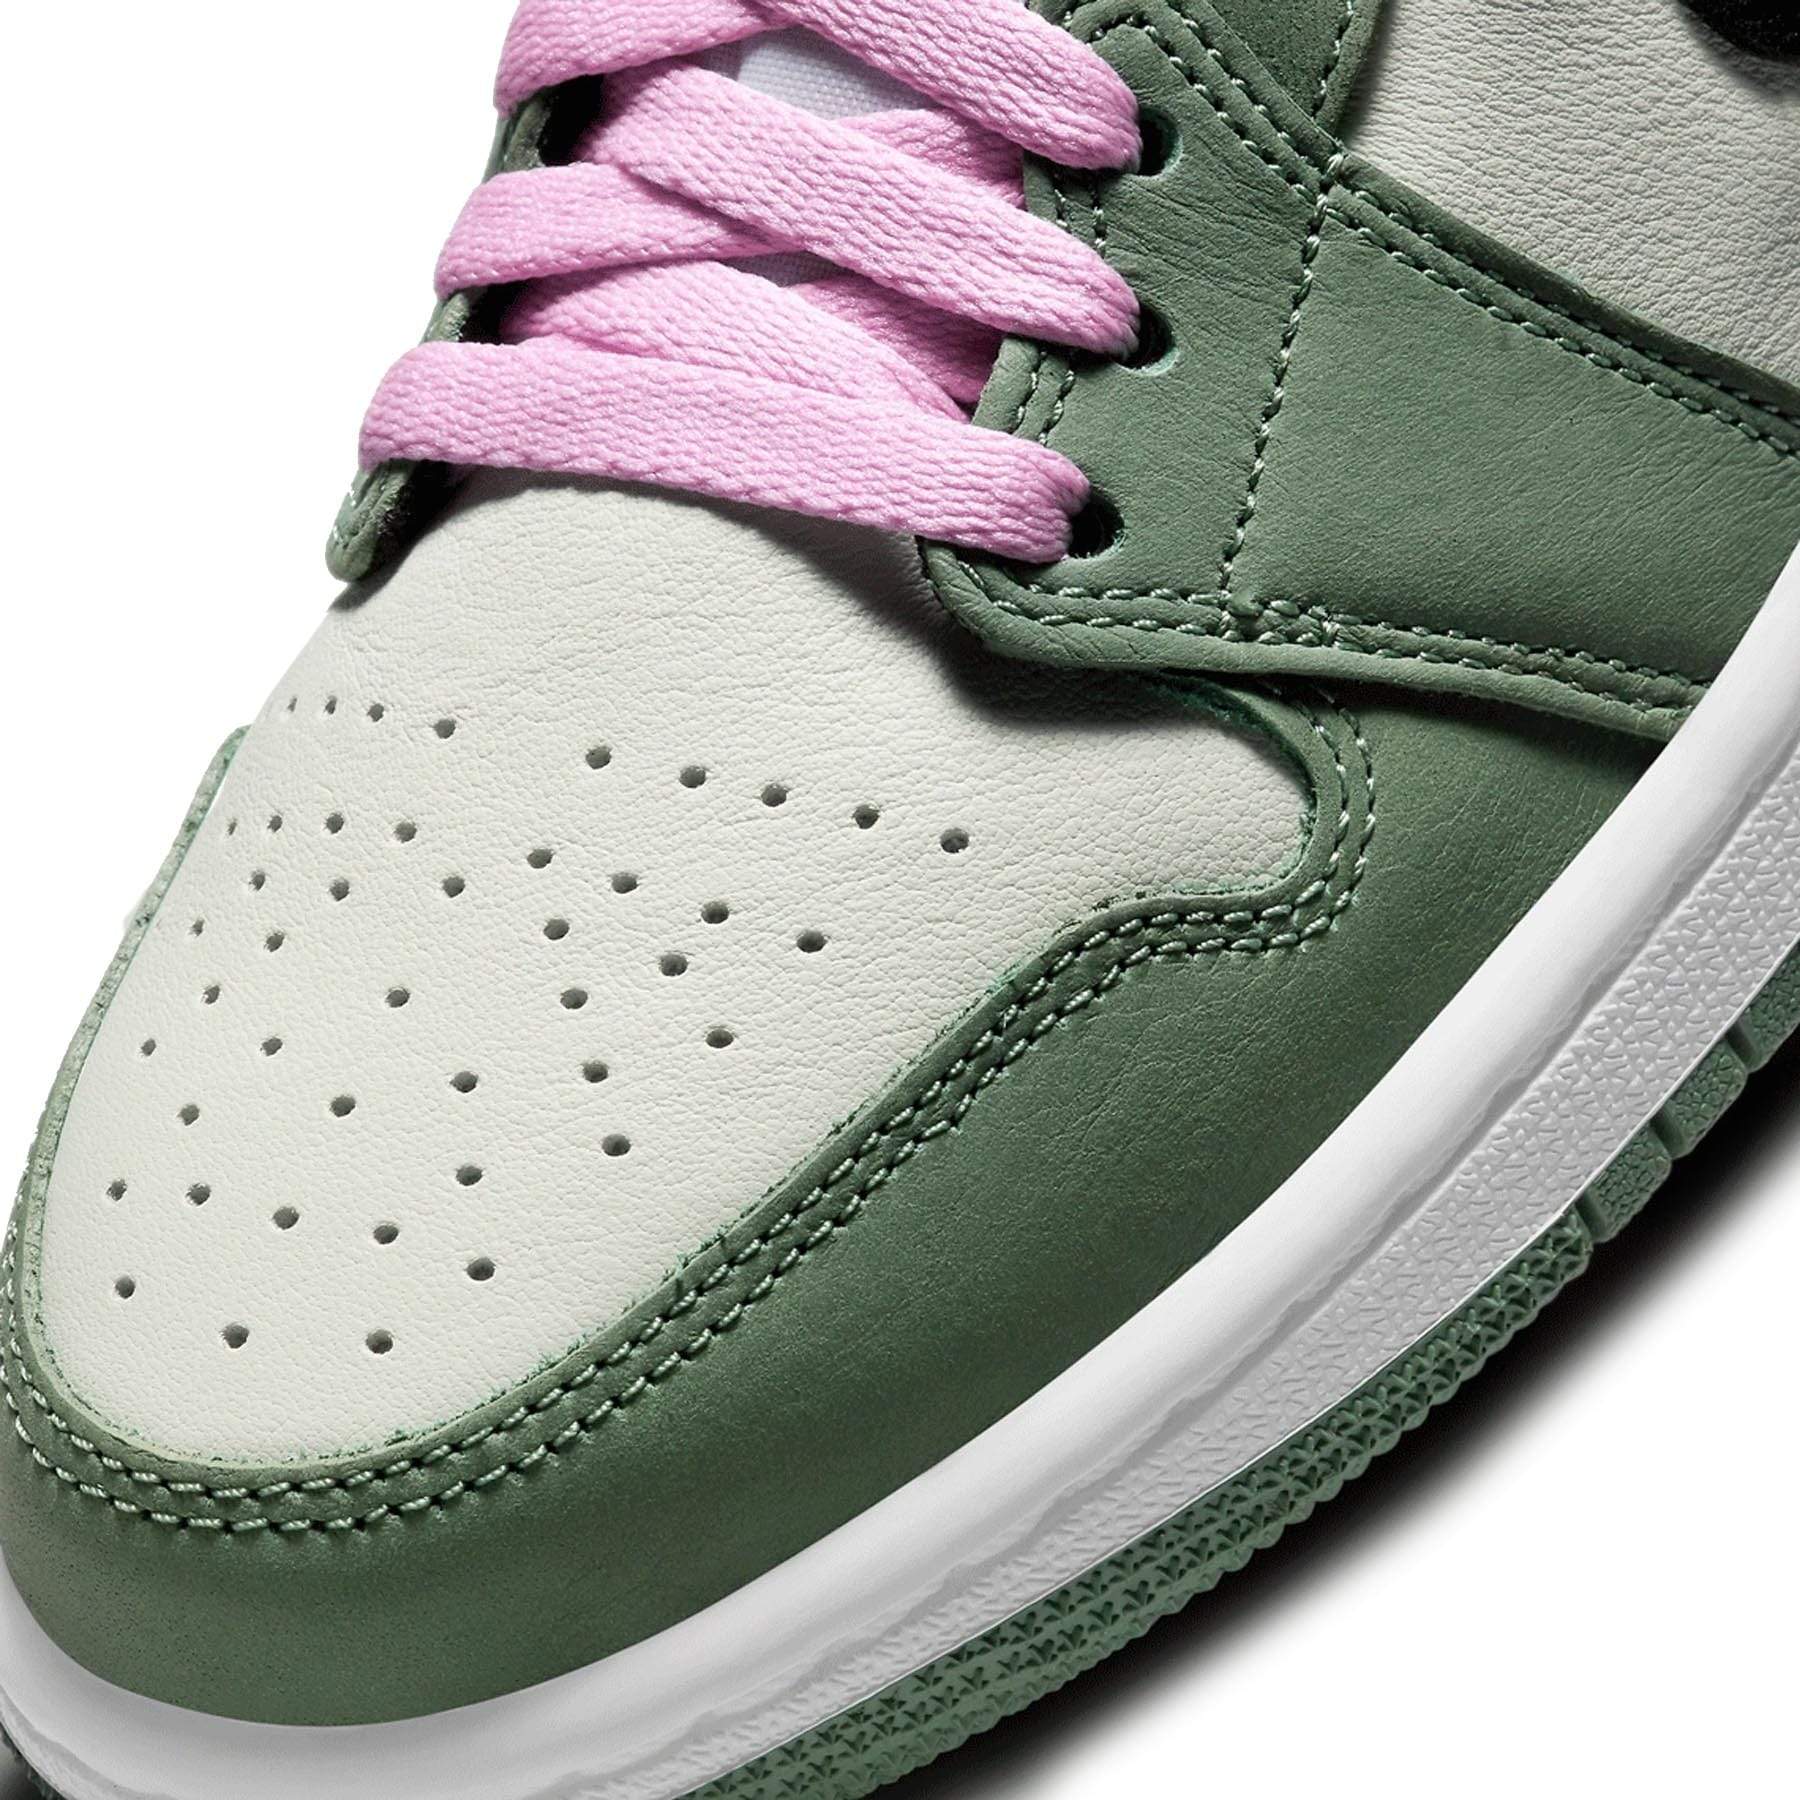 green and pink laces jordans